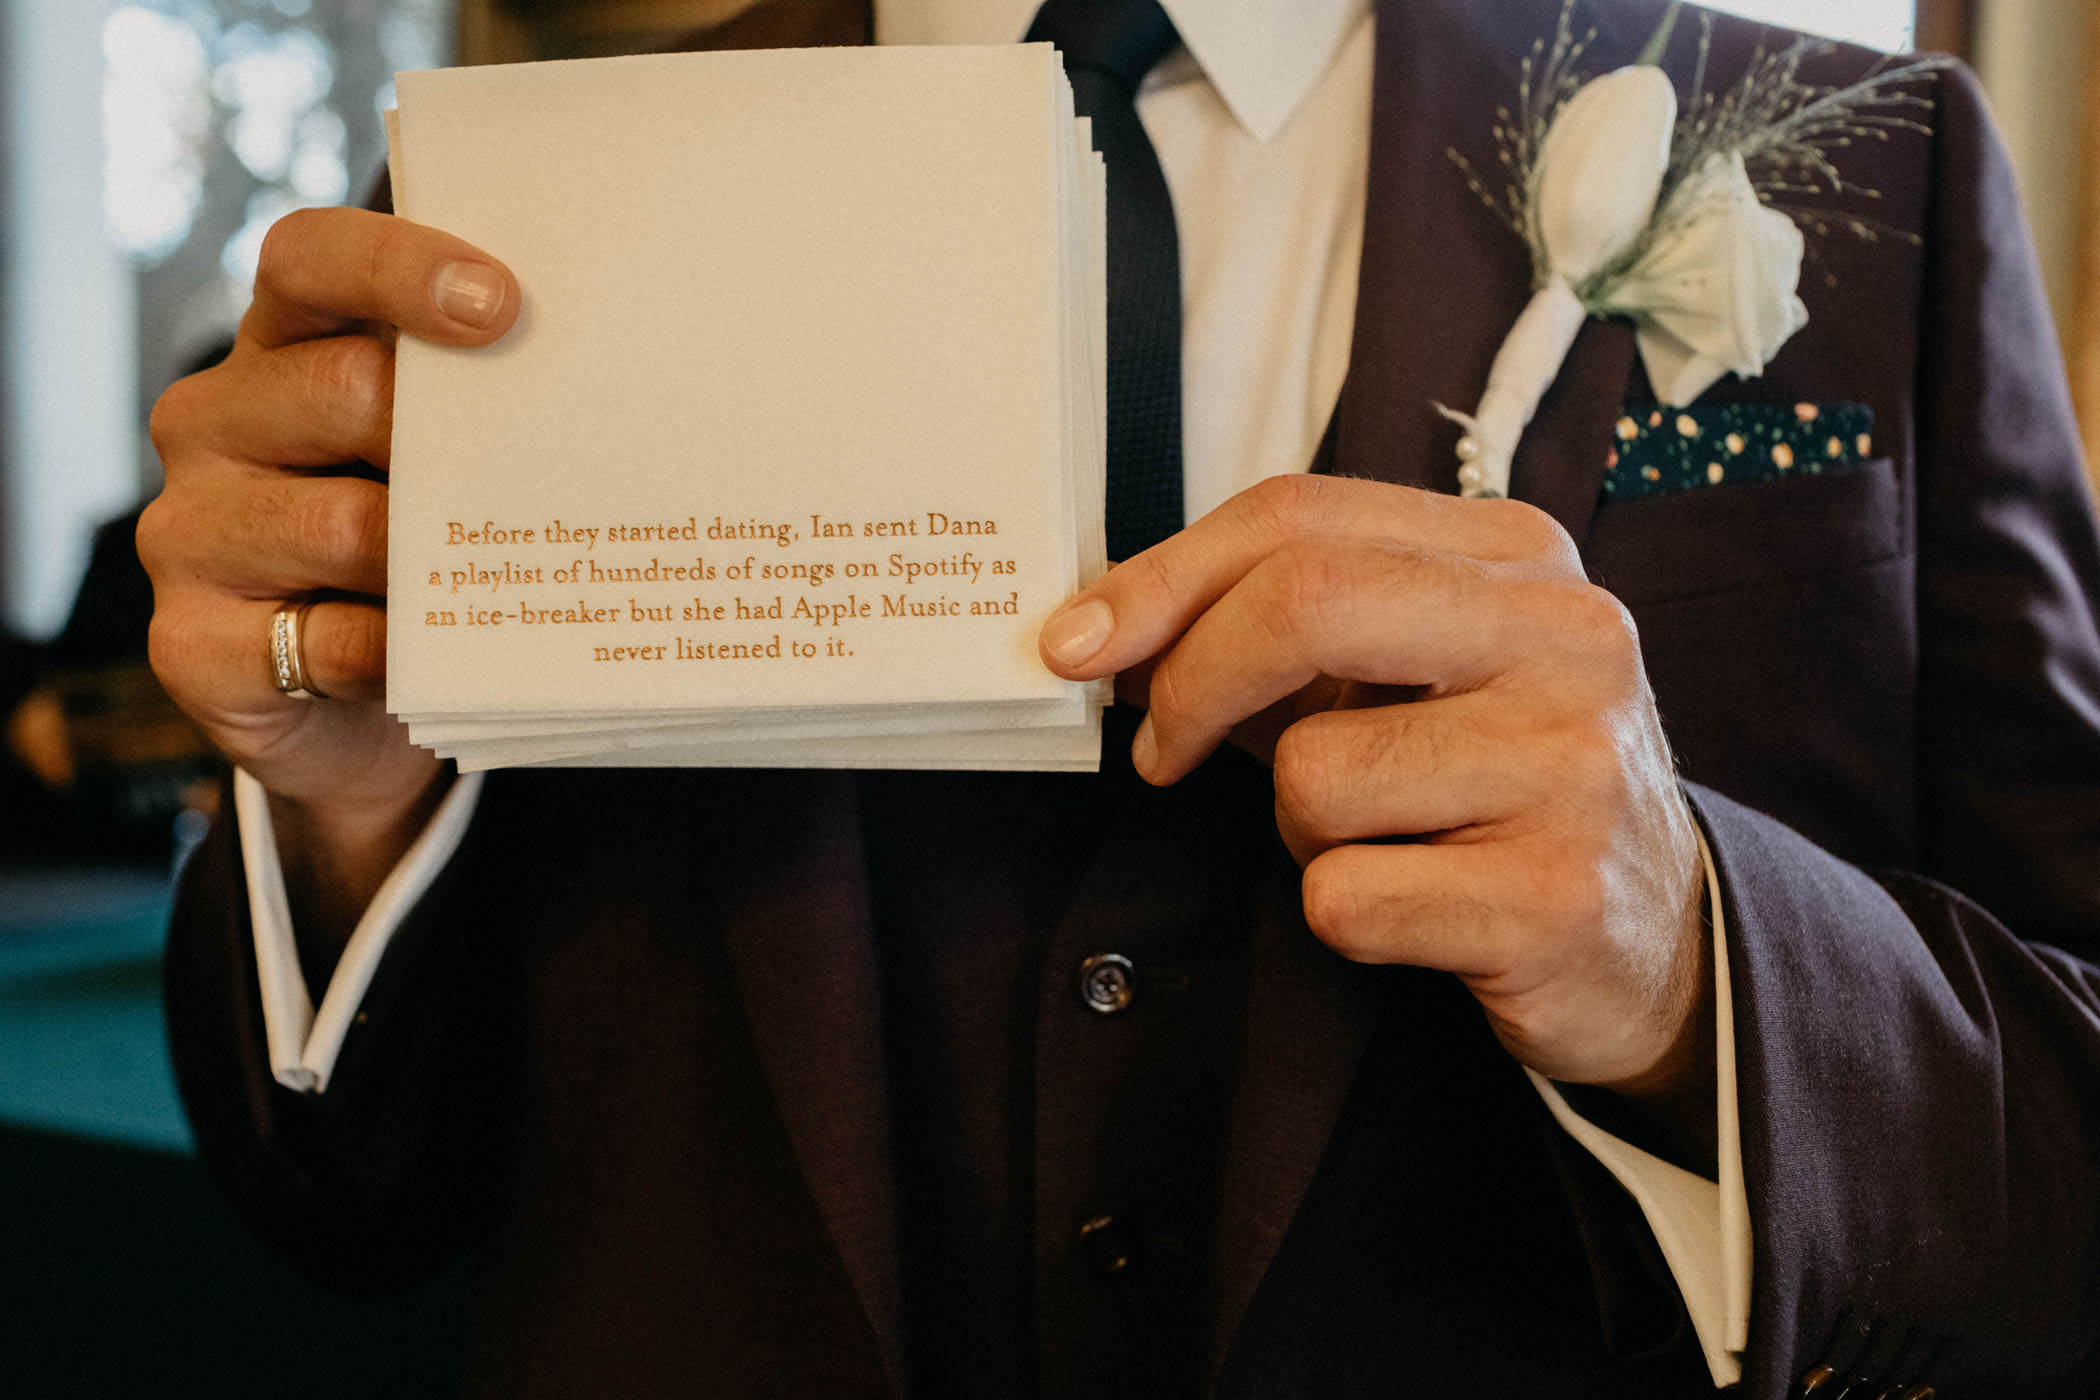 A Modern Los Angeles Wedding Honoring Jewish Traditions for Podcast Hosts